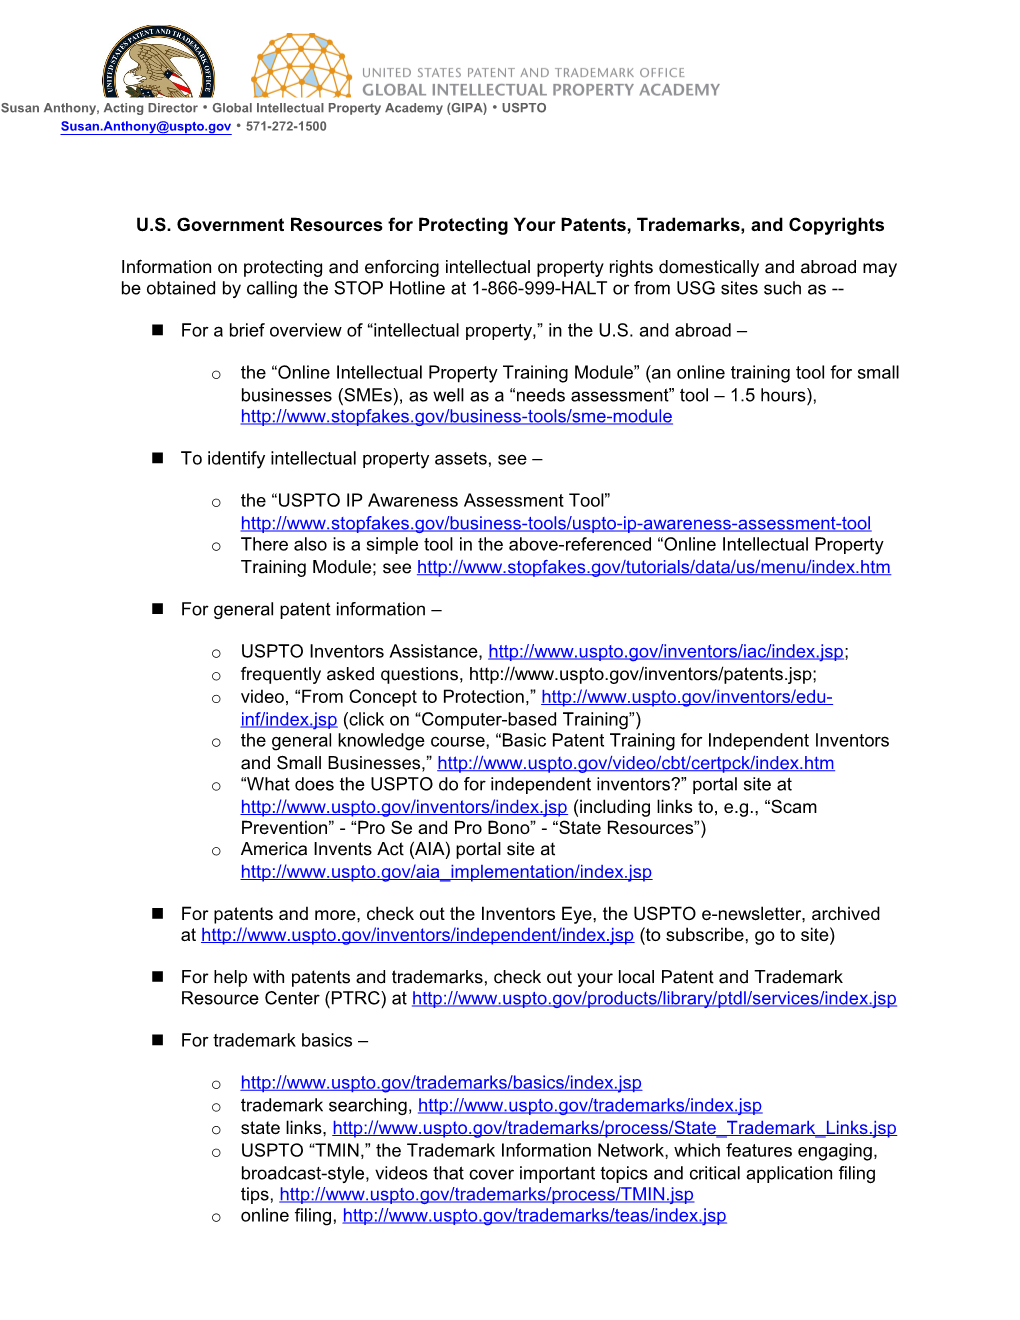 U.S. Government Resources for Protecting Your Patents, Trademarks, and Copyrights